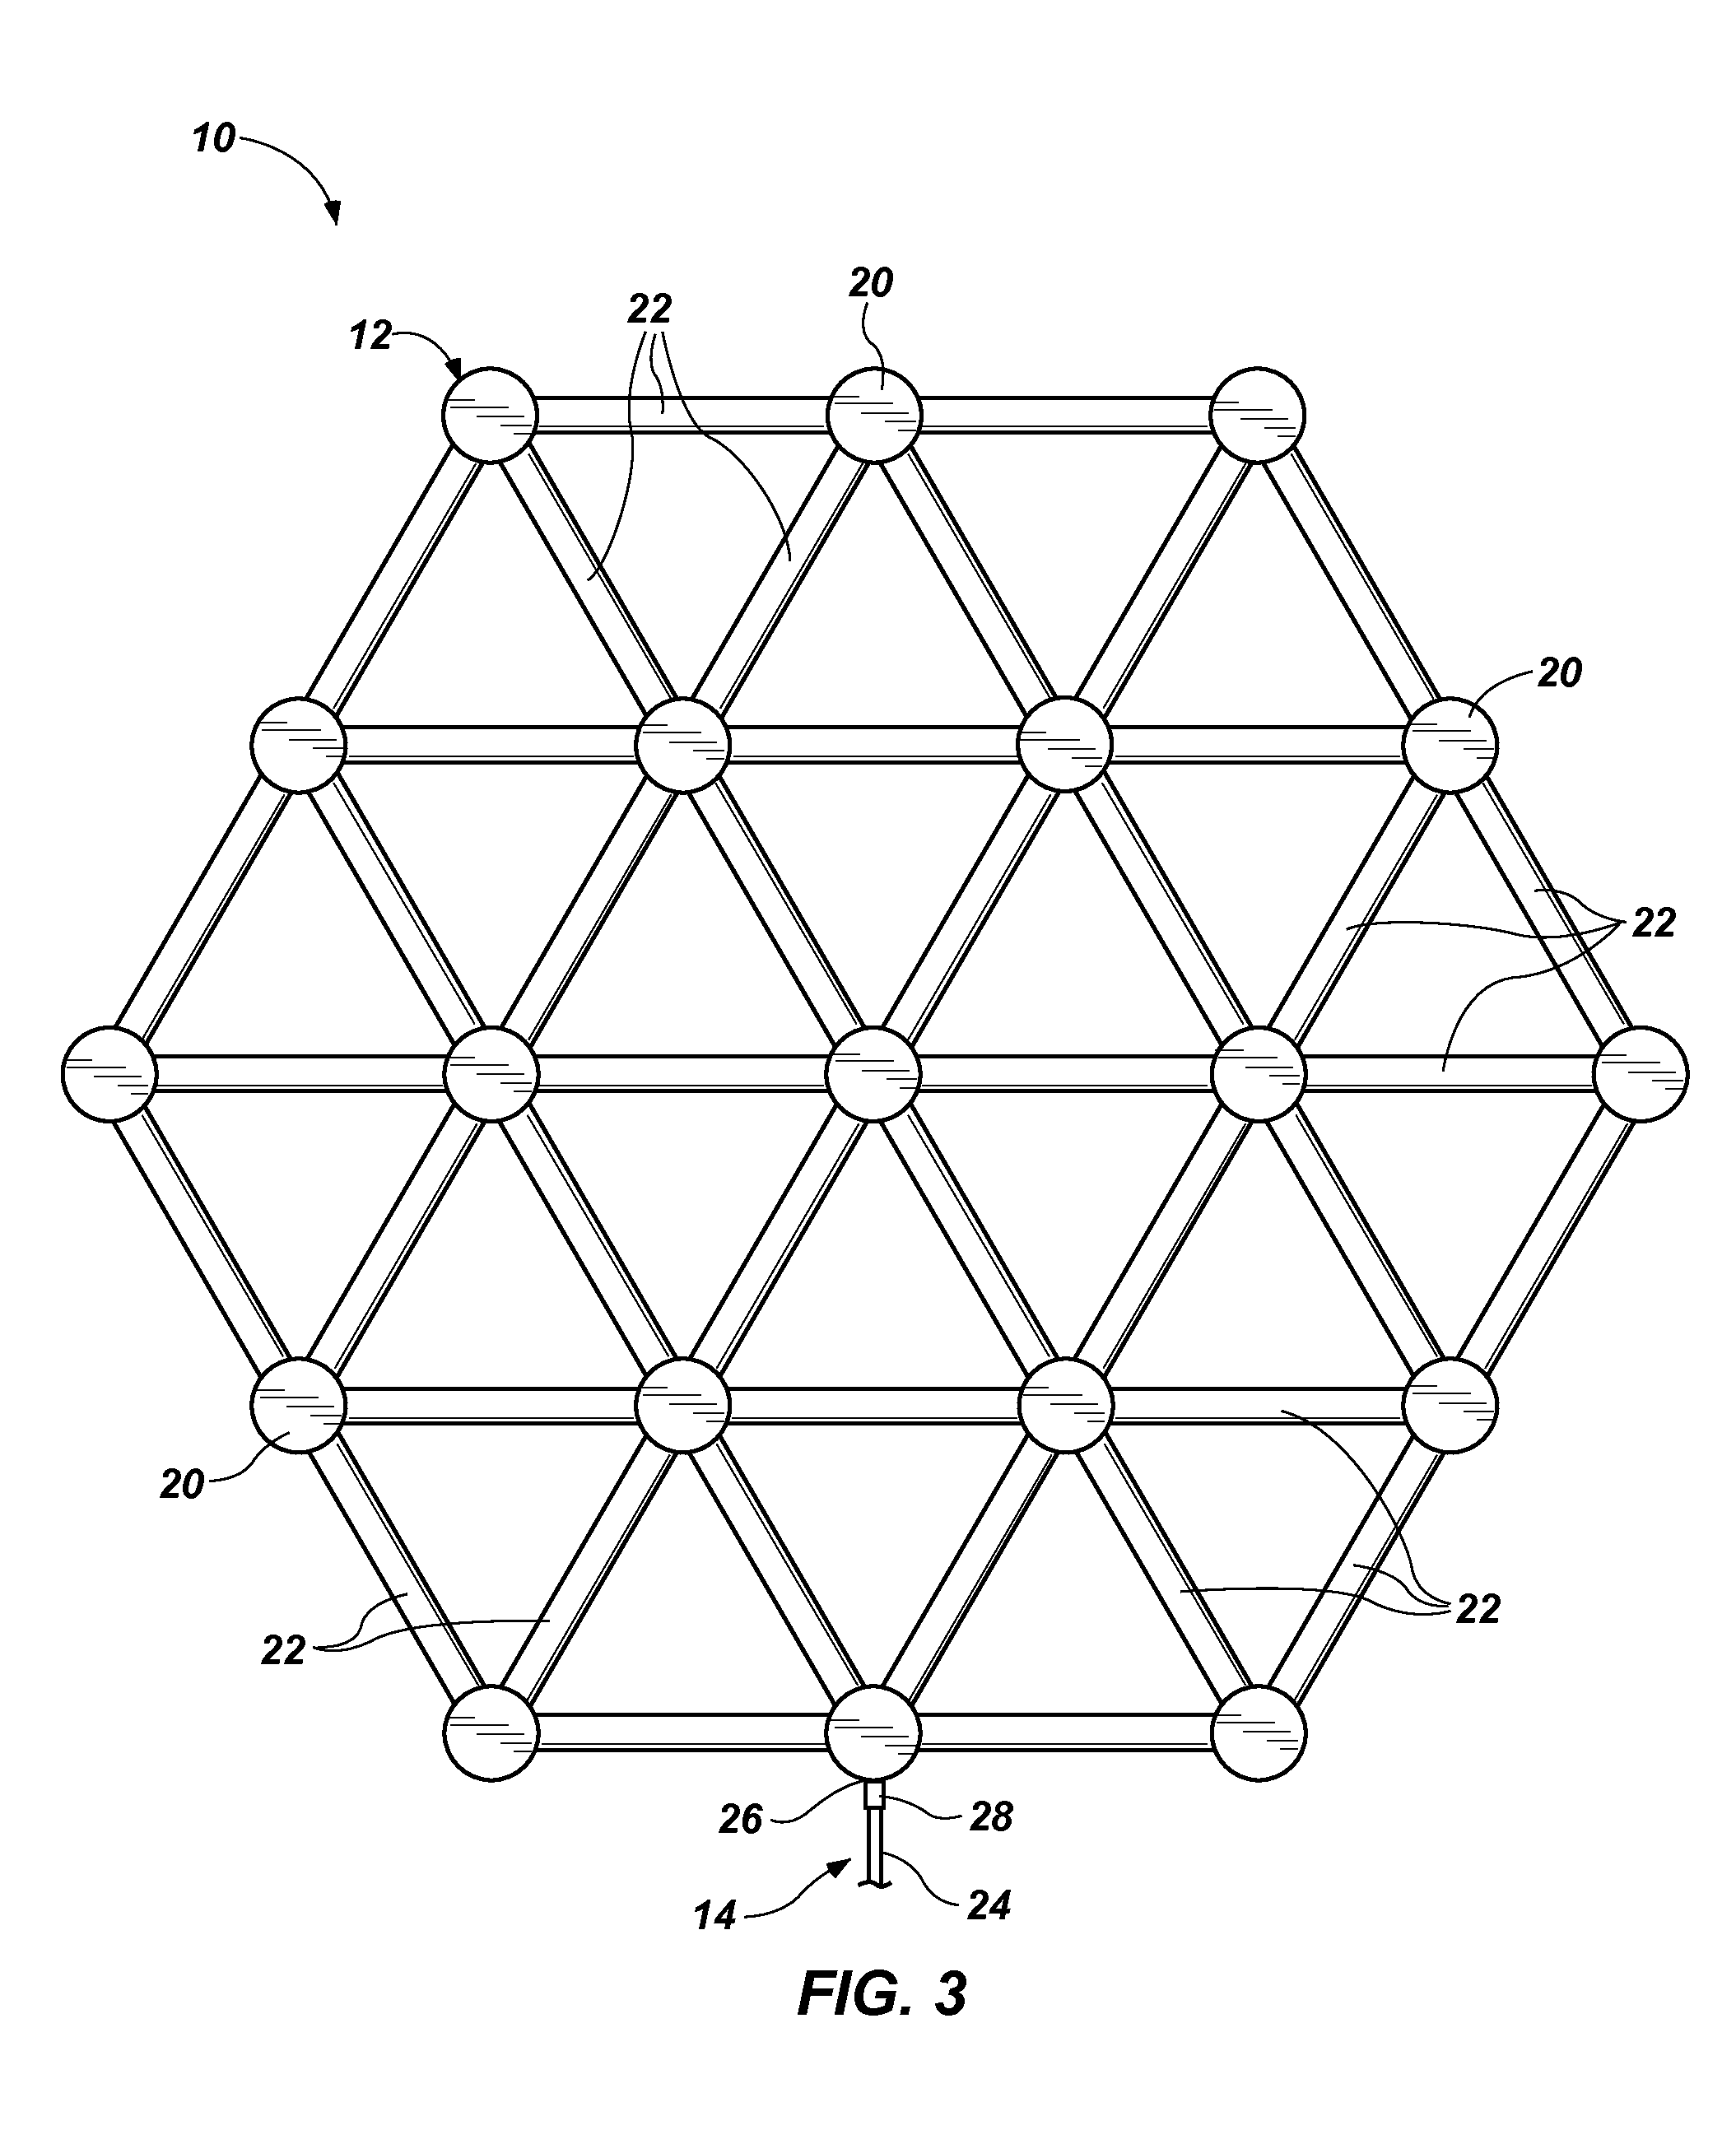 Immersive, flux-guided, micro-coil apparatus and method